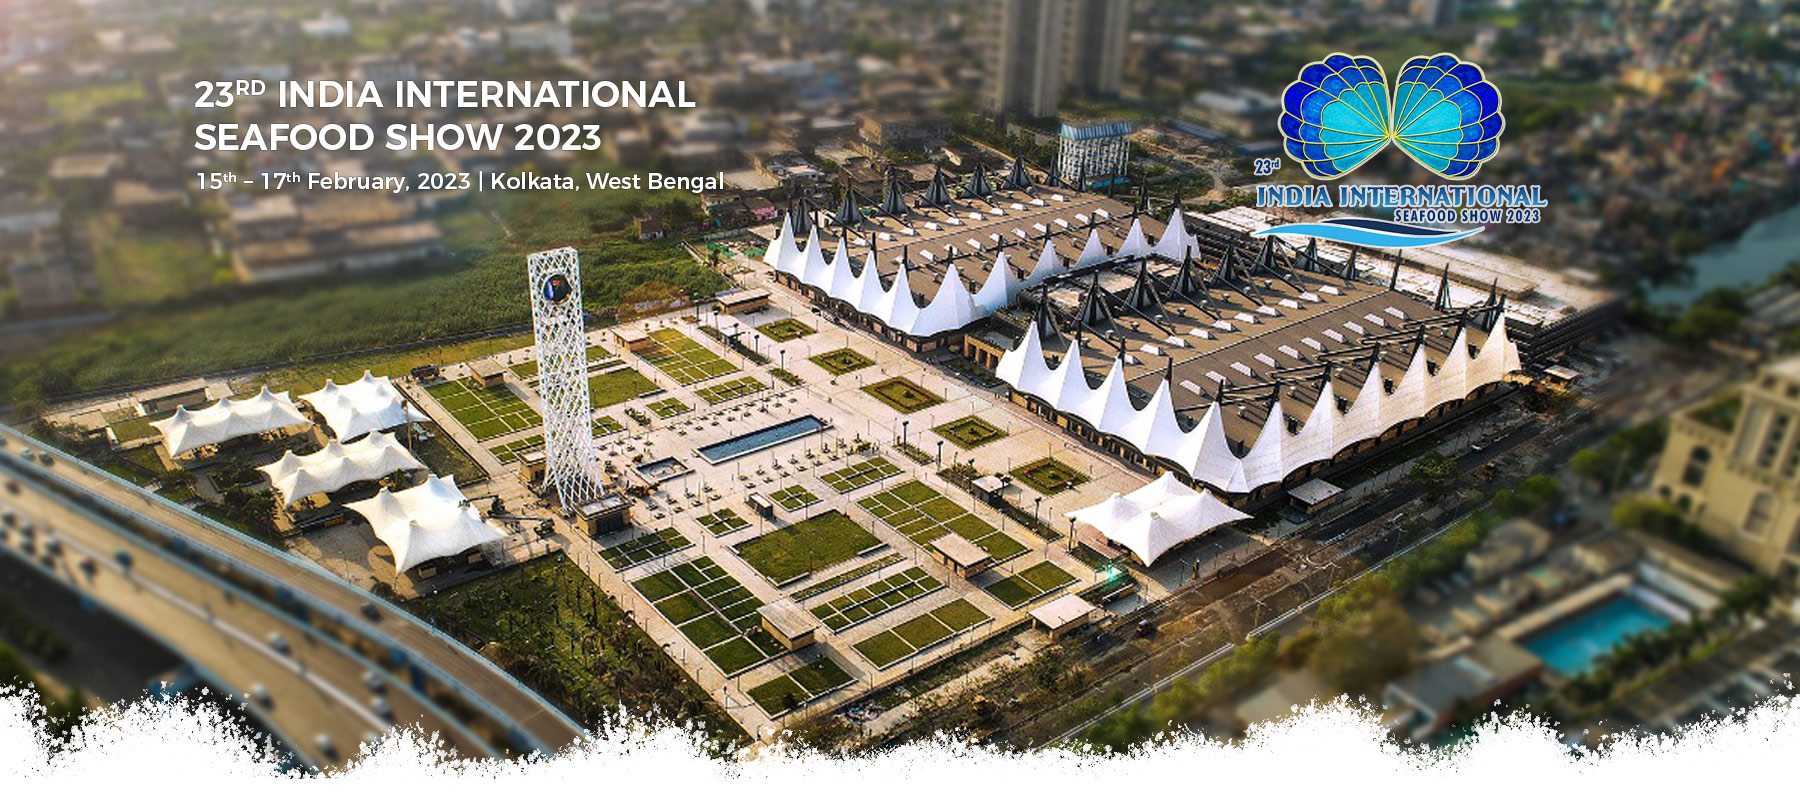 The venue of IISS 2023